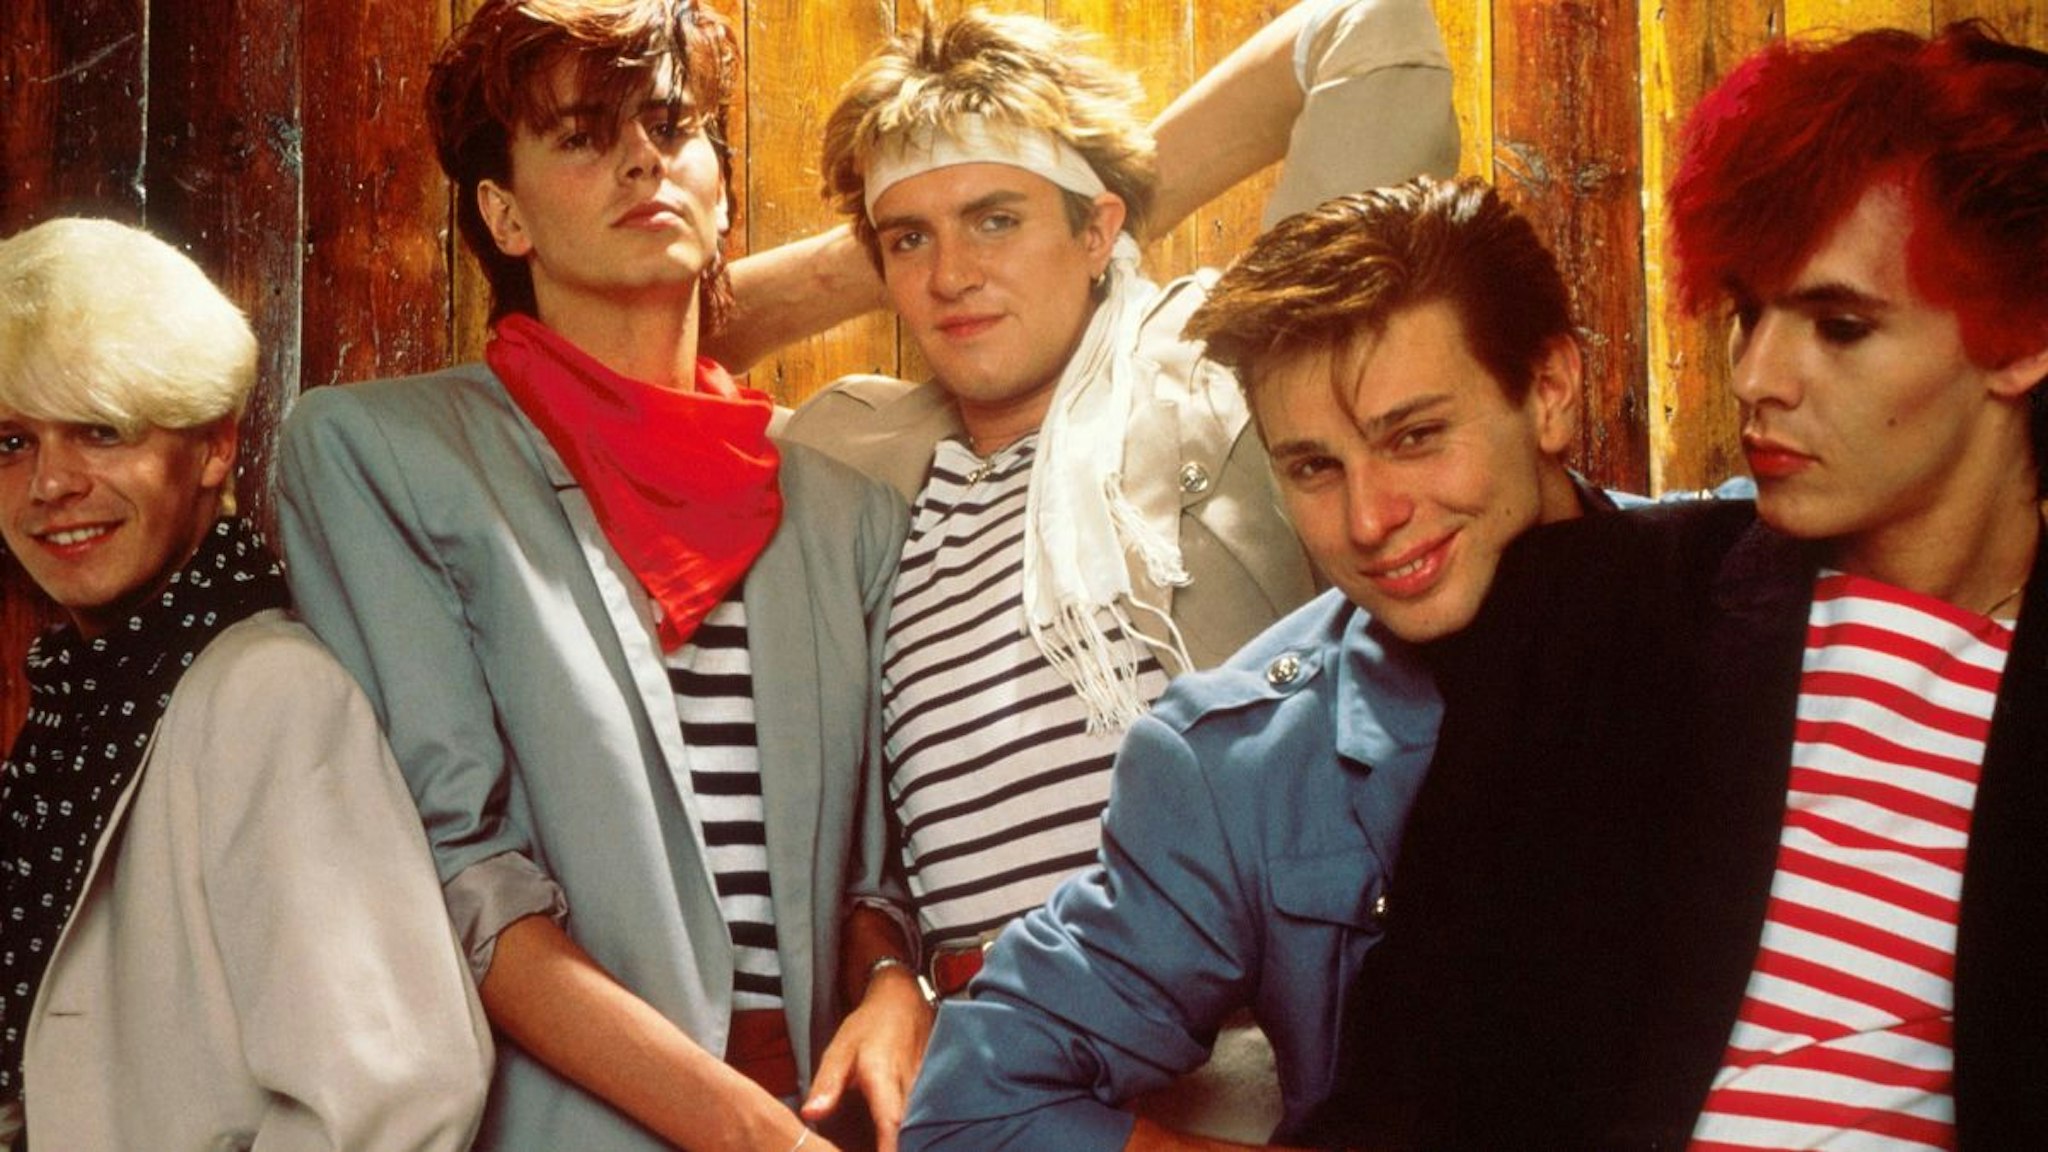 Group Portrait of British band Duran Duran in London, England in 1981. Left to right guitarist Andy Taylor, bassist John Taylor, singer Simon Le Bon, drummer Roger Taylor and keyboard player Nick Rhodes.